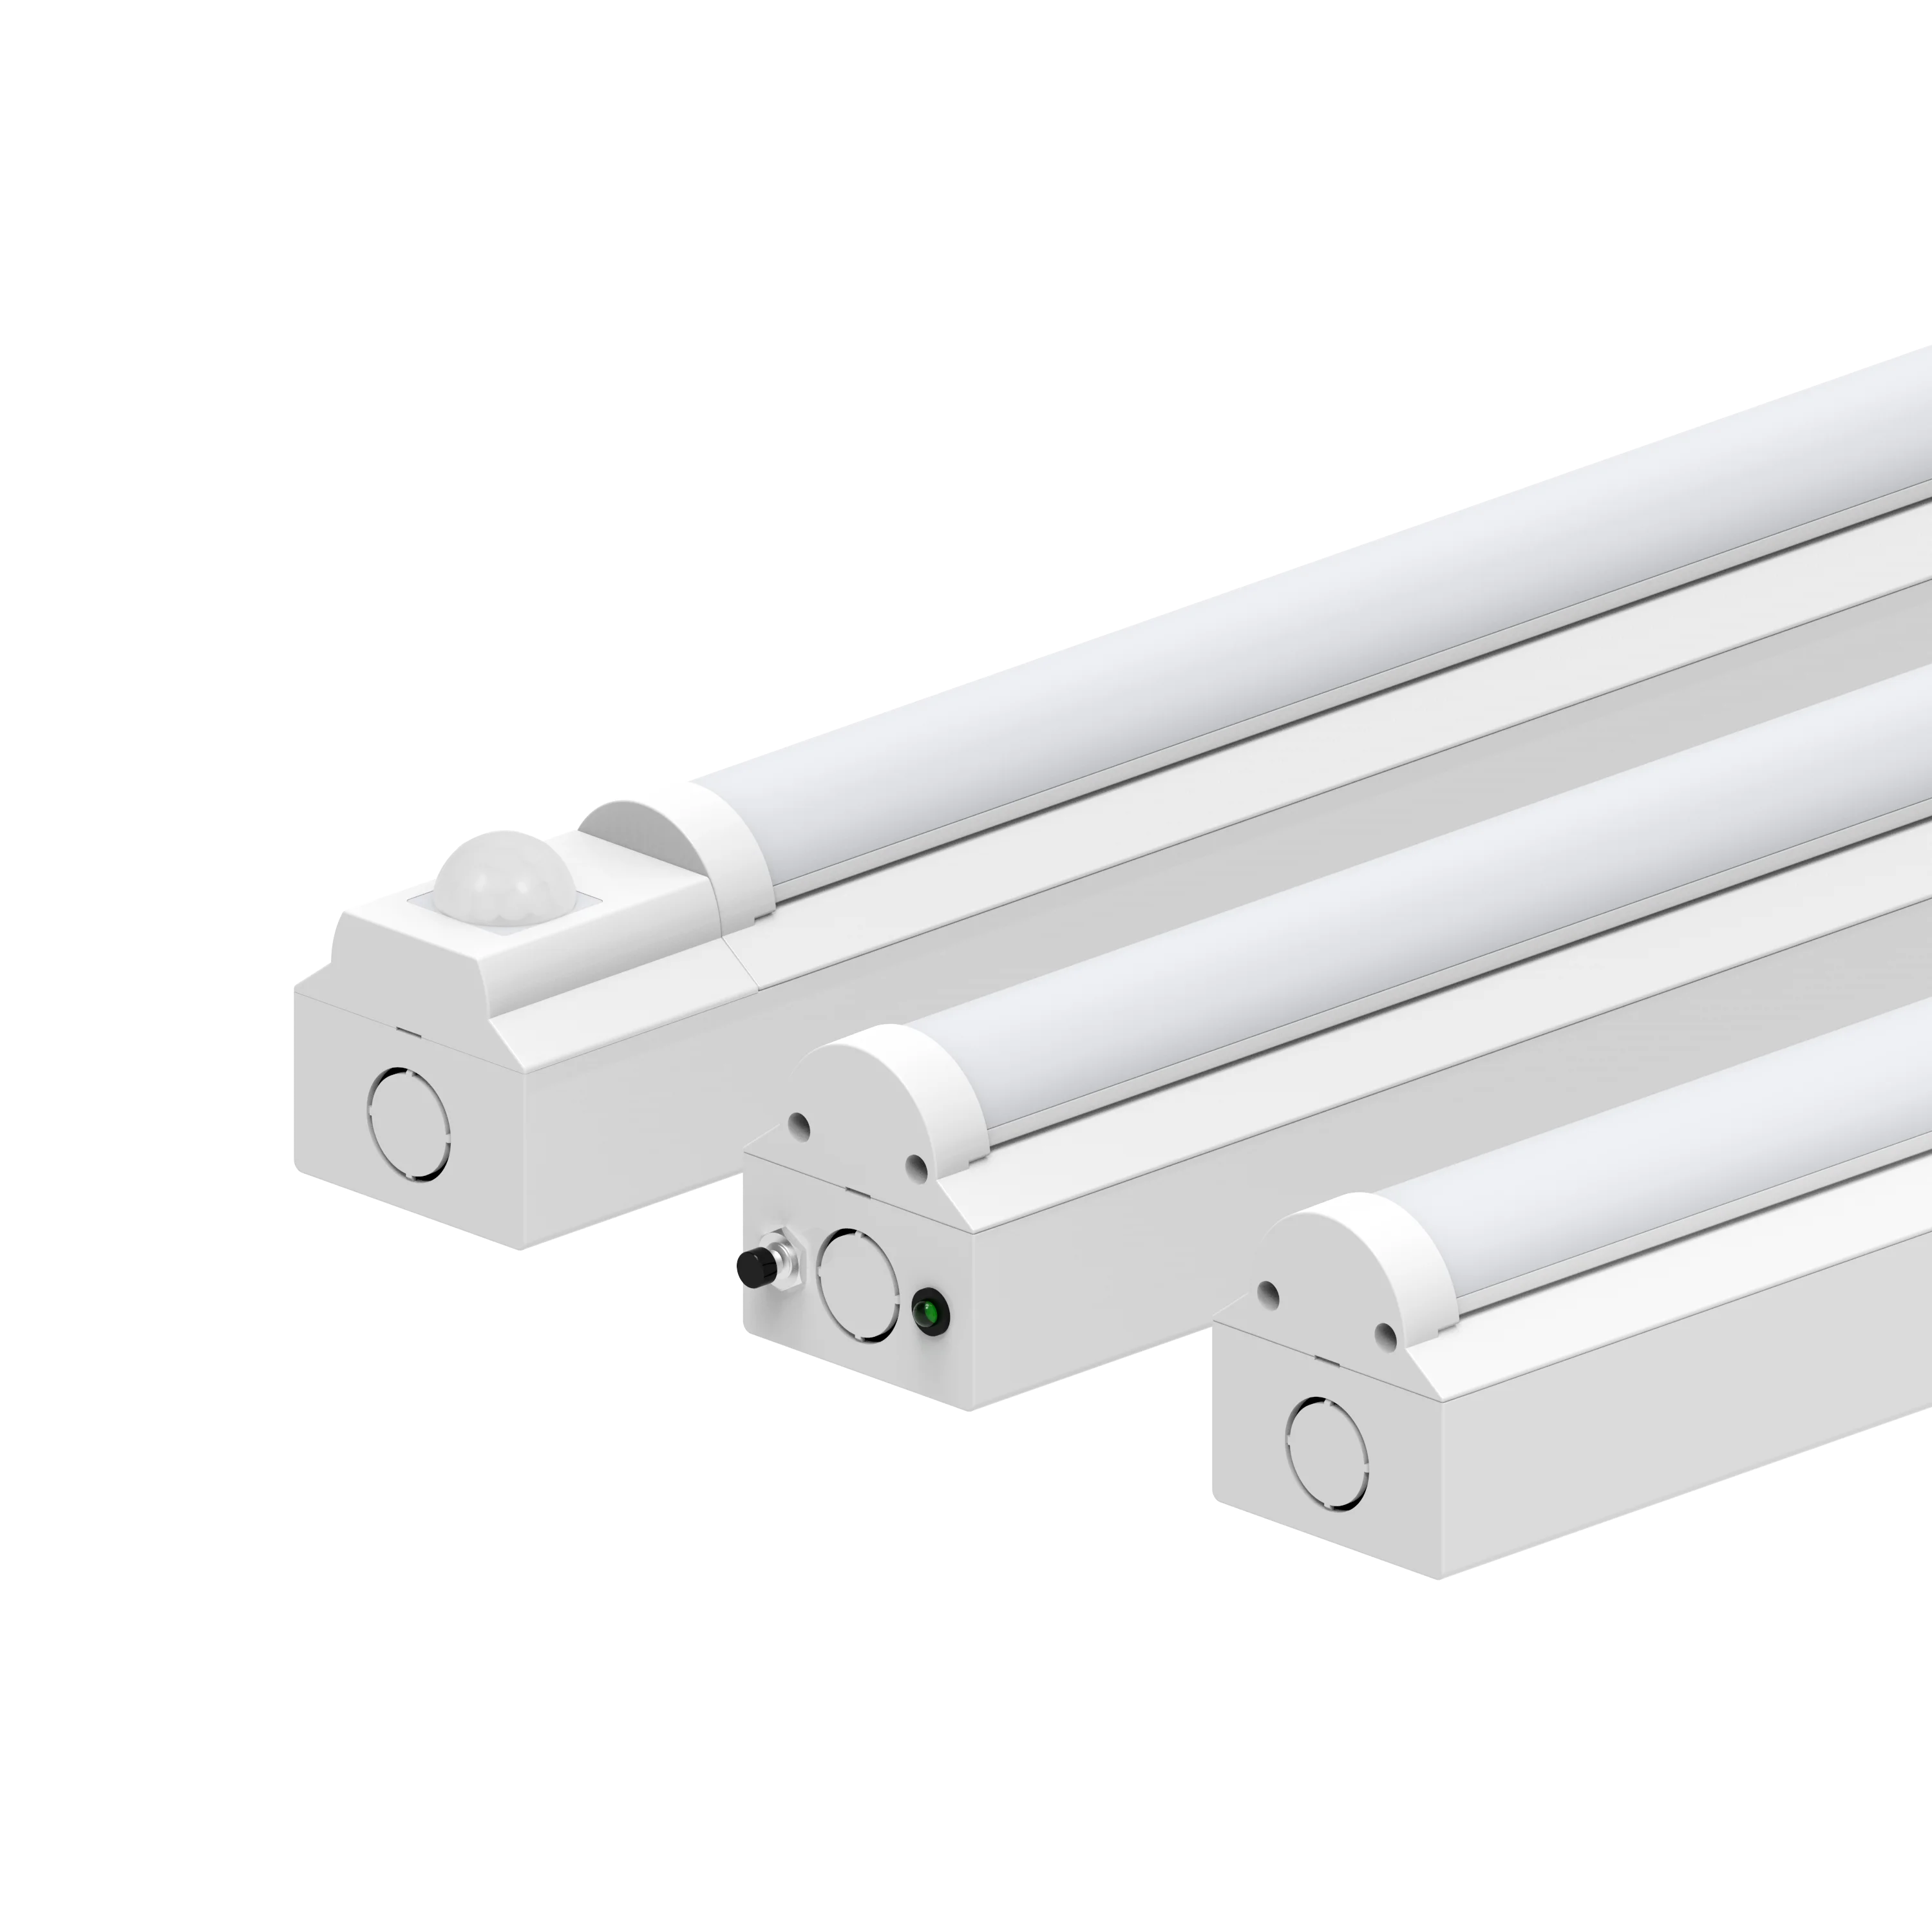 Source Factory price EMC Slim Ip20 Hanging suspended office batten light tri-proof light linear lights for Industrial on m.alibaba.com